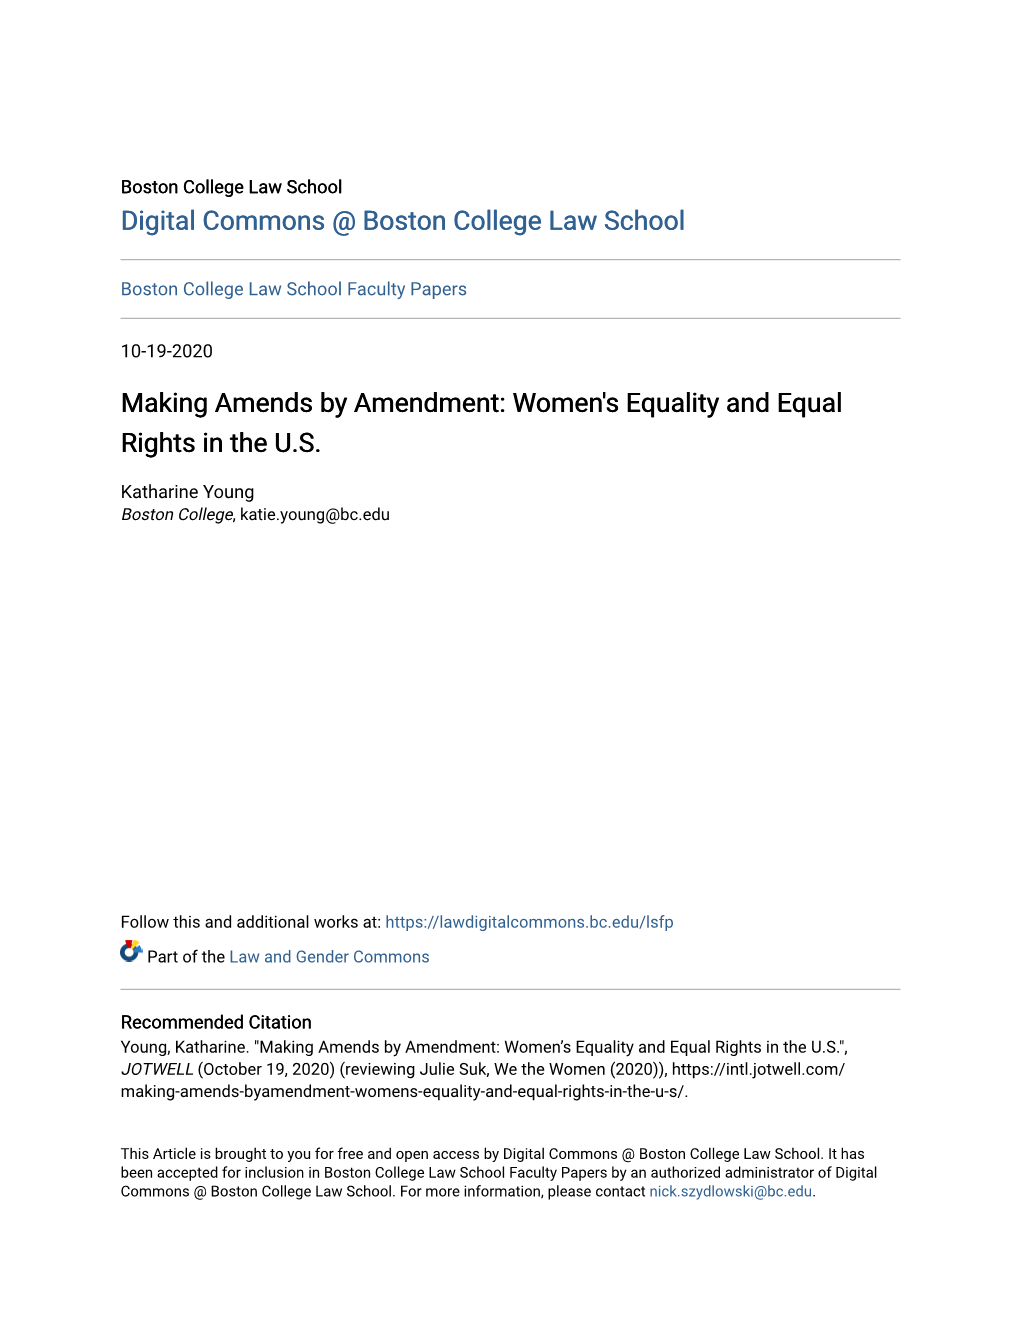 Women's Equality and Equal Rights in the US